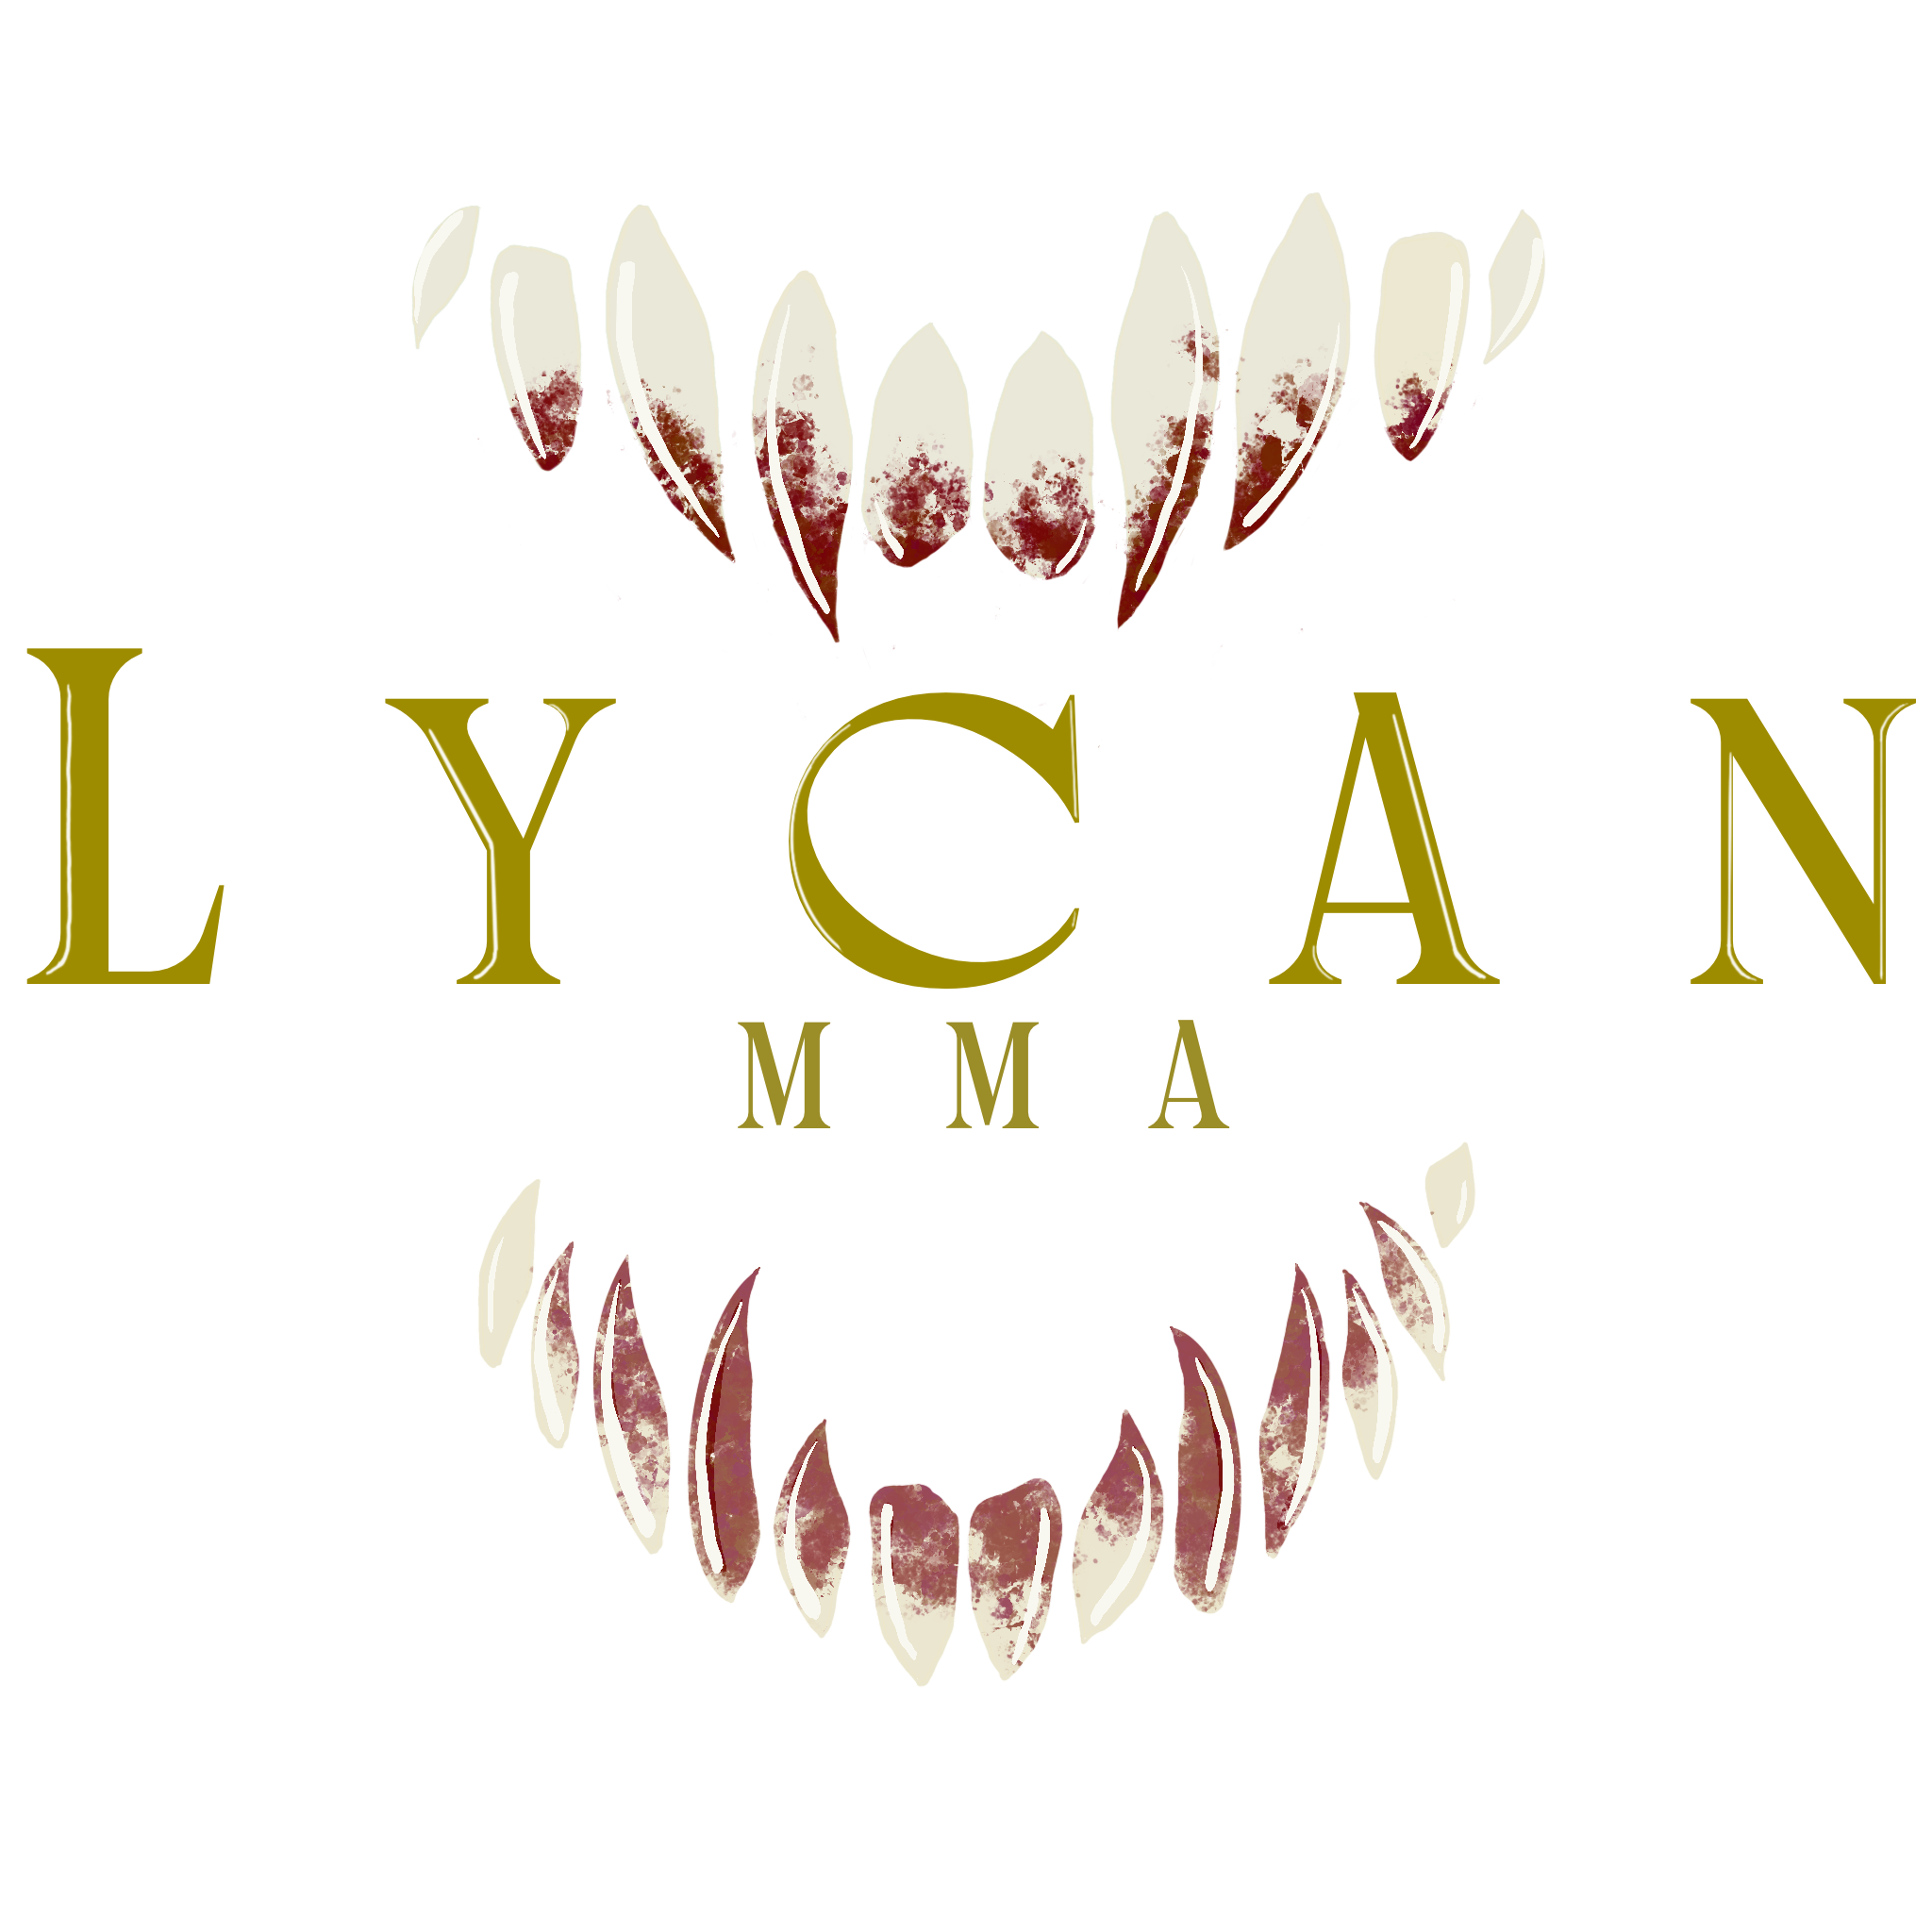 New Lycan MMA logo featuring teeth and the text "Lycan MMA" in the center